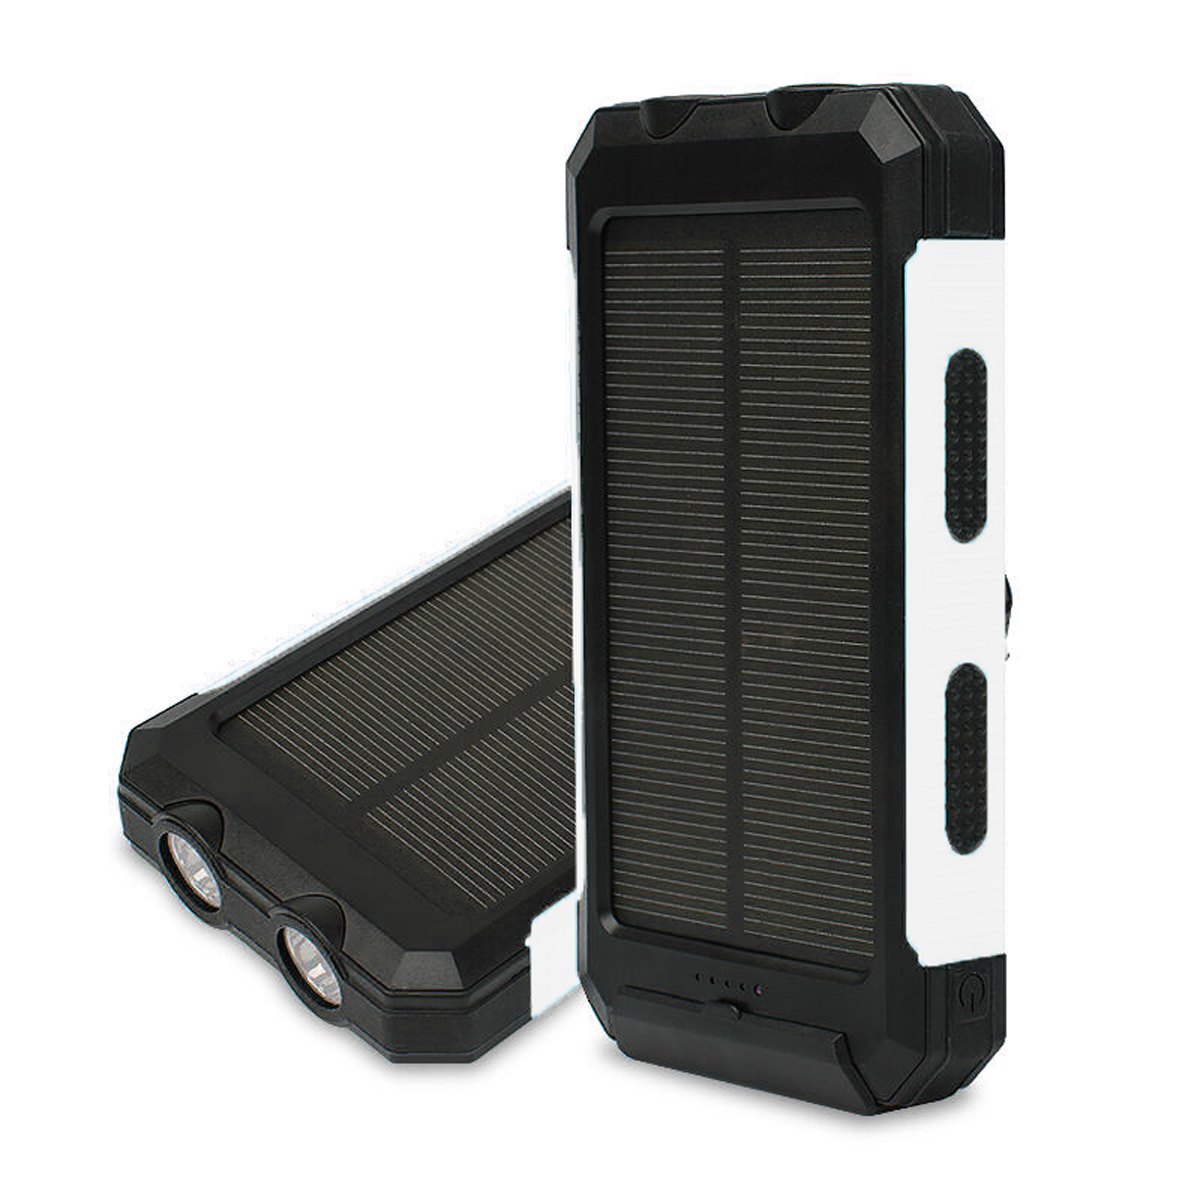 8000MAH-Waterproof-Solar-Power-Bank-Solar-Charger-Built-In-Compass-Dual-USB-Portable-2-LEDs-Light-1716505-4